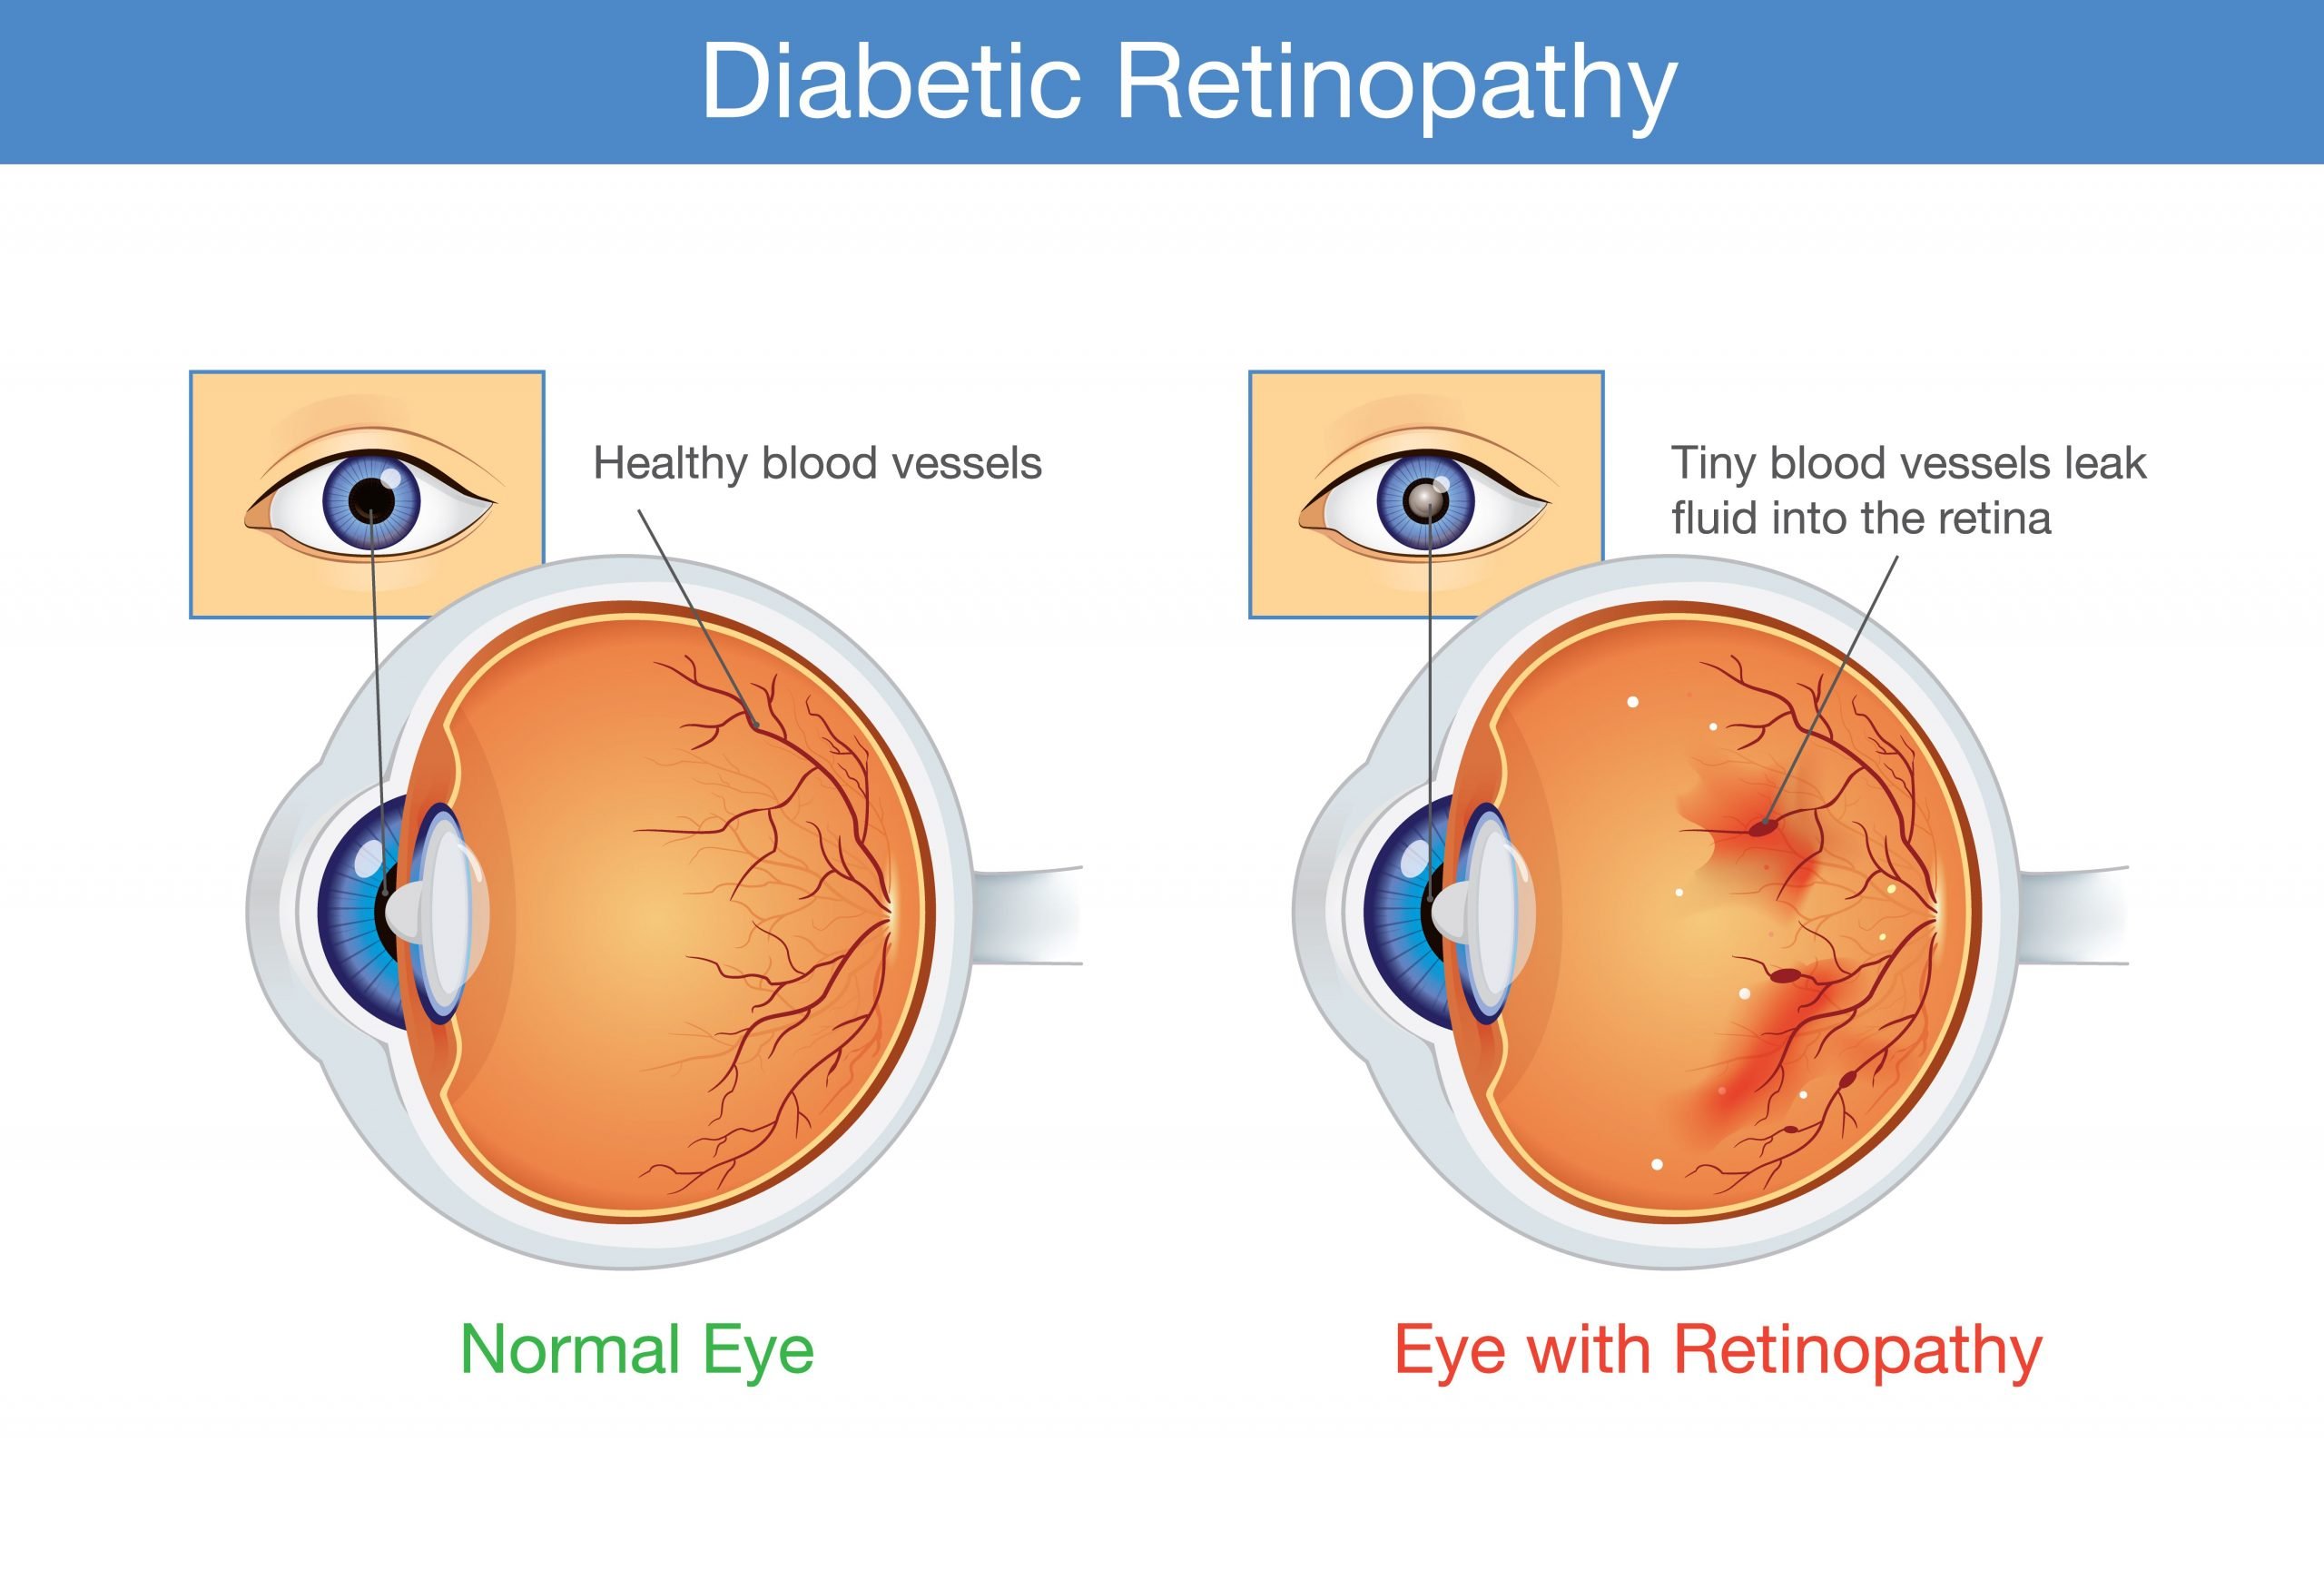 Causes and Treatments for Diabetic Retinopathy